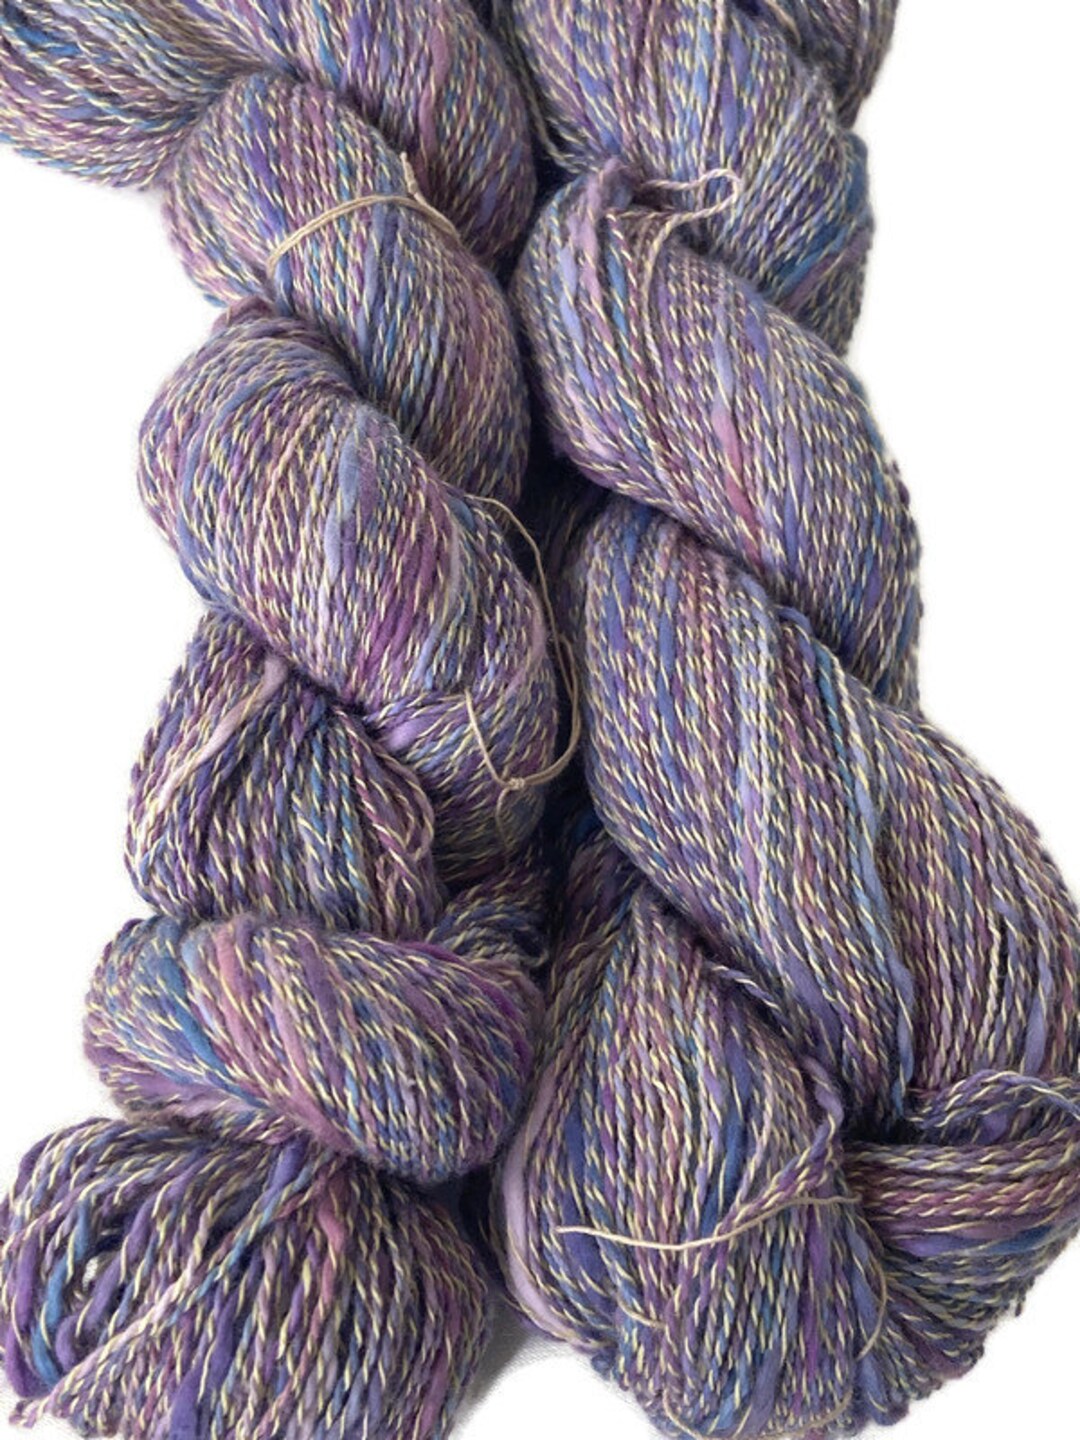 Hand-dyed, cotton and rayon, boucle yarn, 200 yard skeins, in